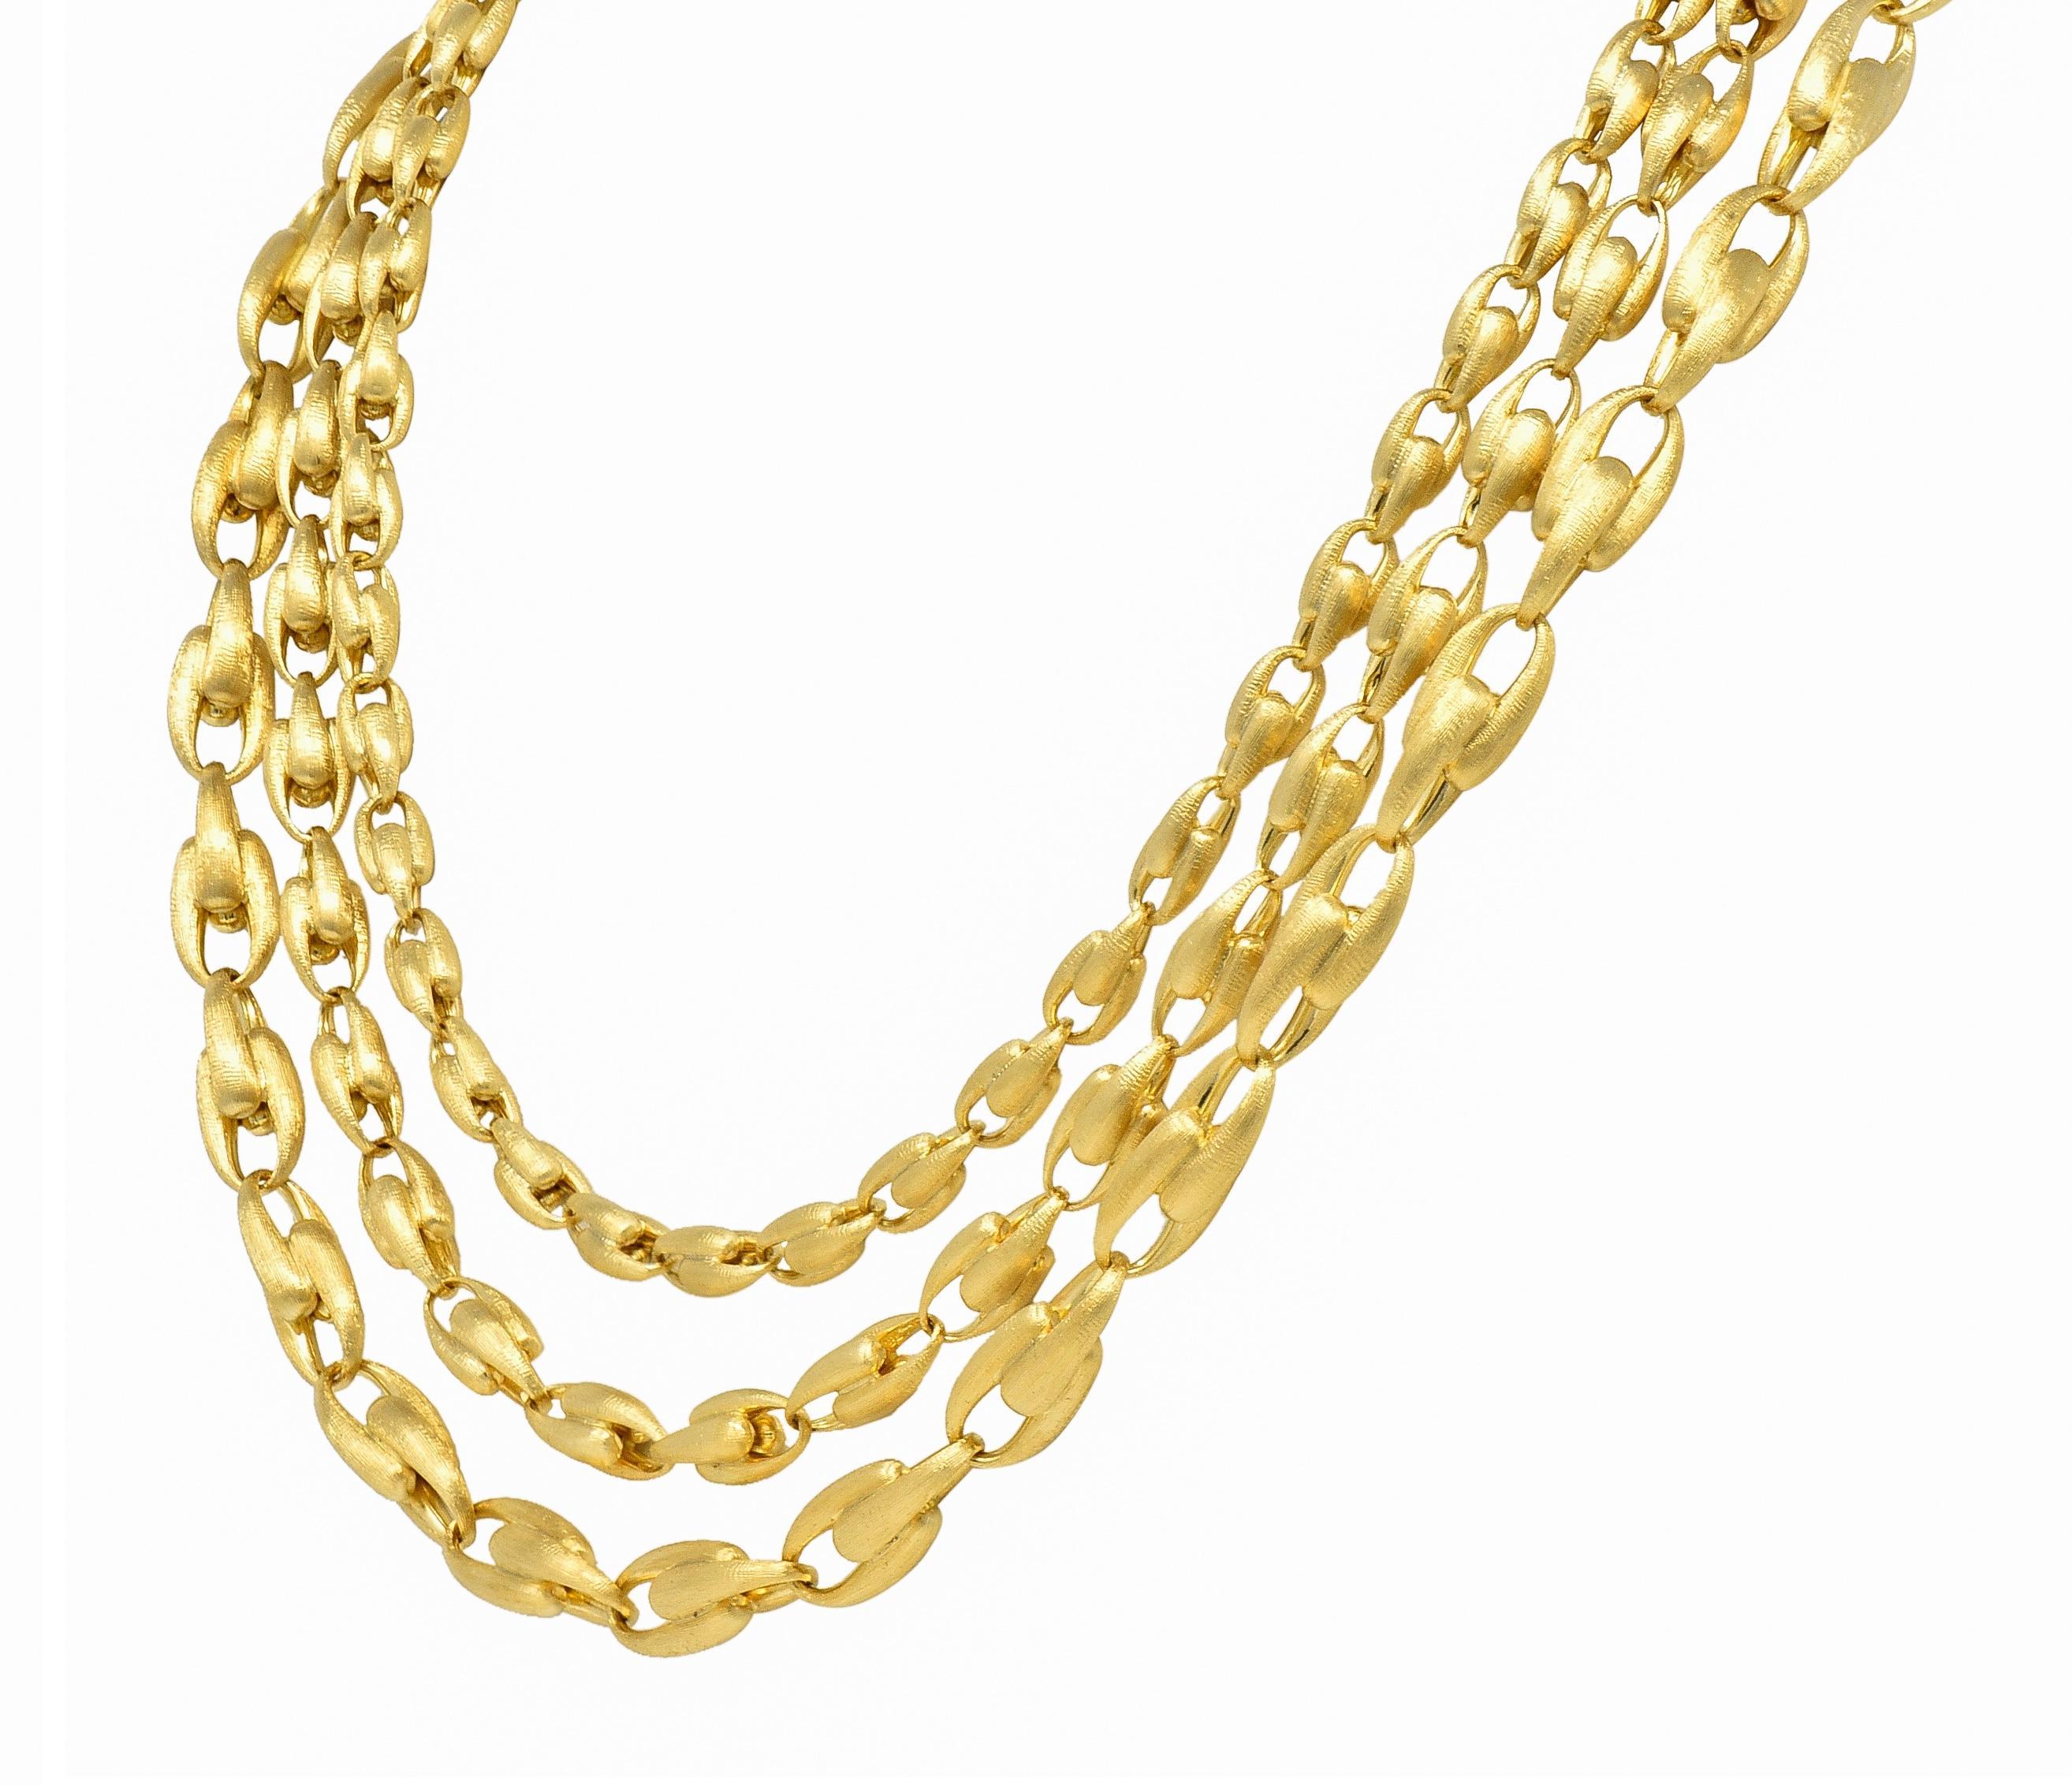 Maro Bicego Brushed 18 Karat Yellow Gold Multi-Strand U Link Lucia Necklace In Excellent Condition For Sale In Philadelphia, PA